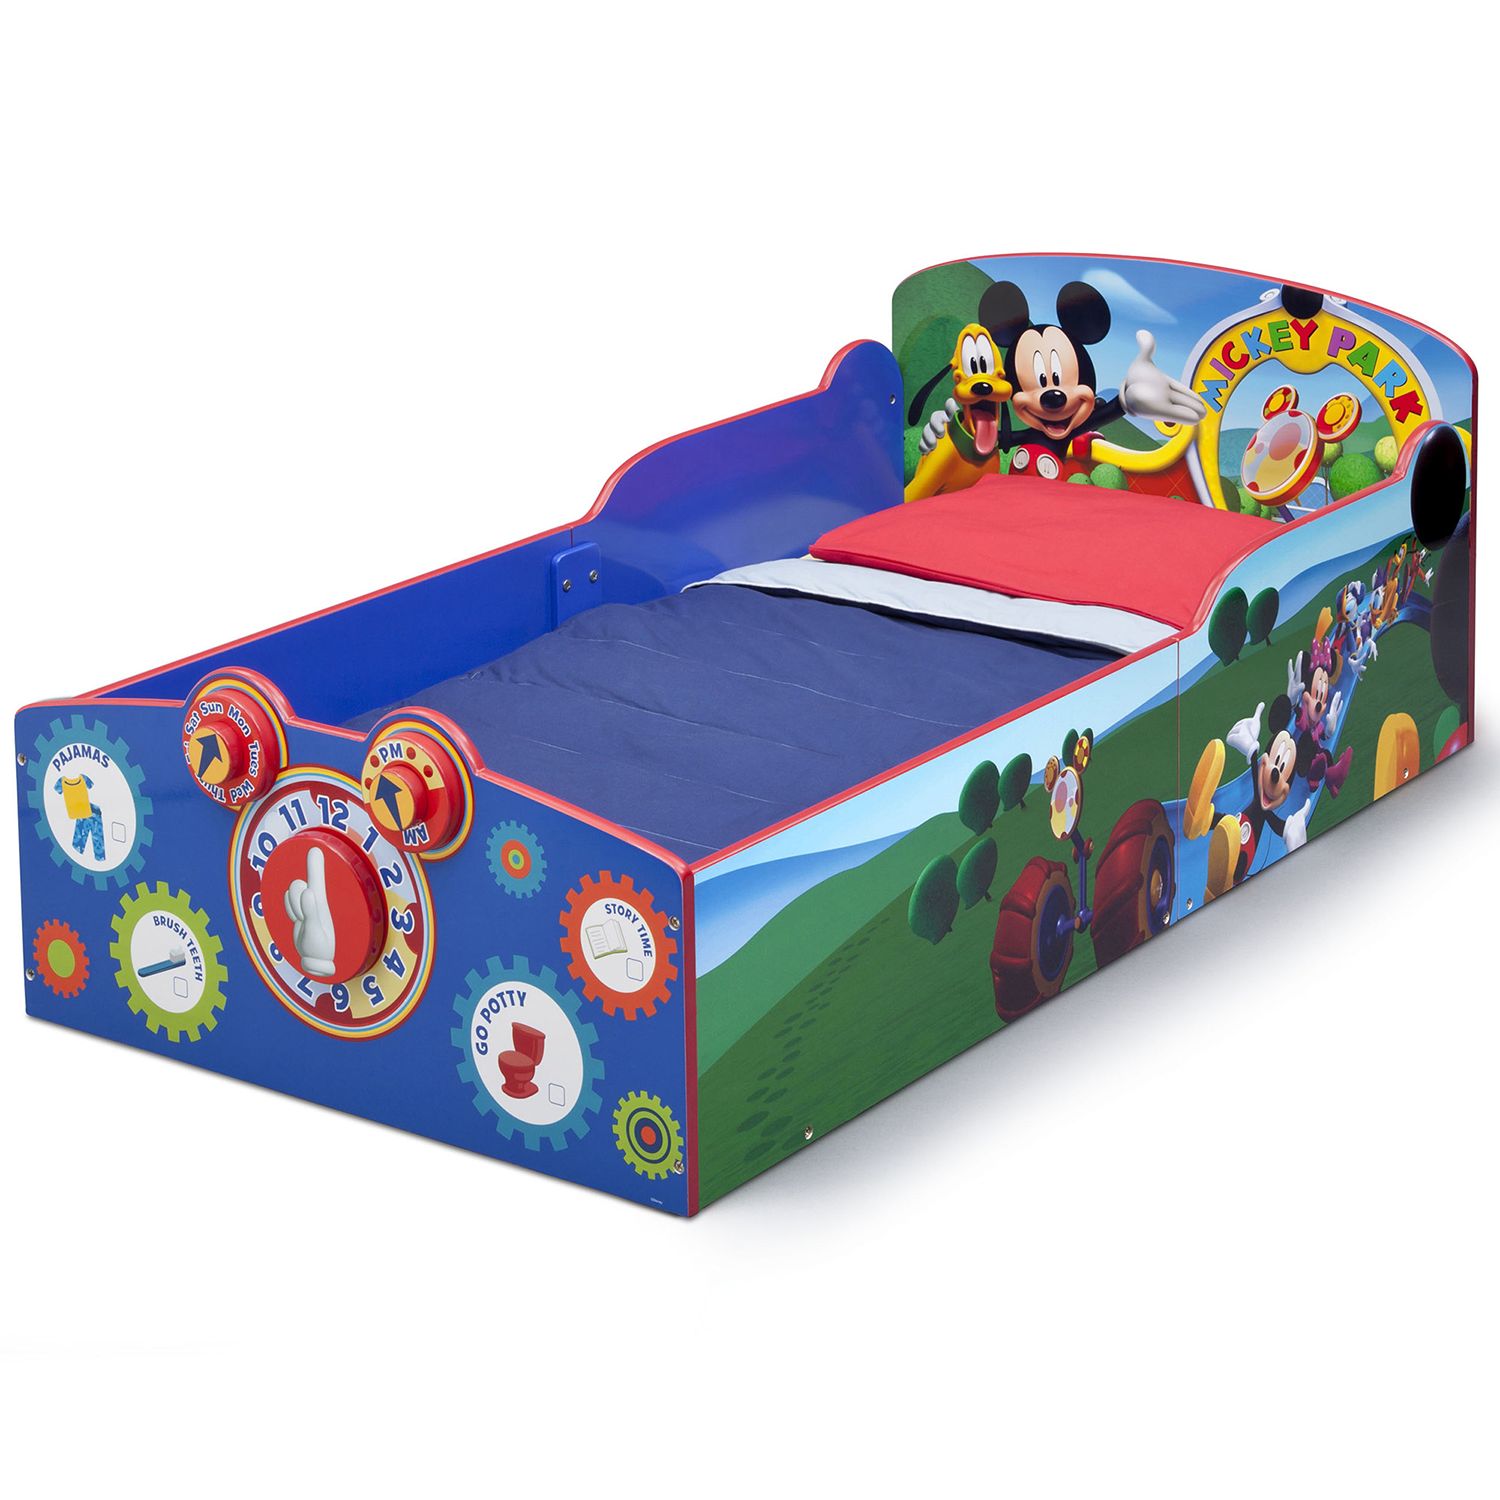 Image for Disney 's Mickey Mouse Interactive Wood Toddler Bed by Delta Children at Kohl's.